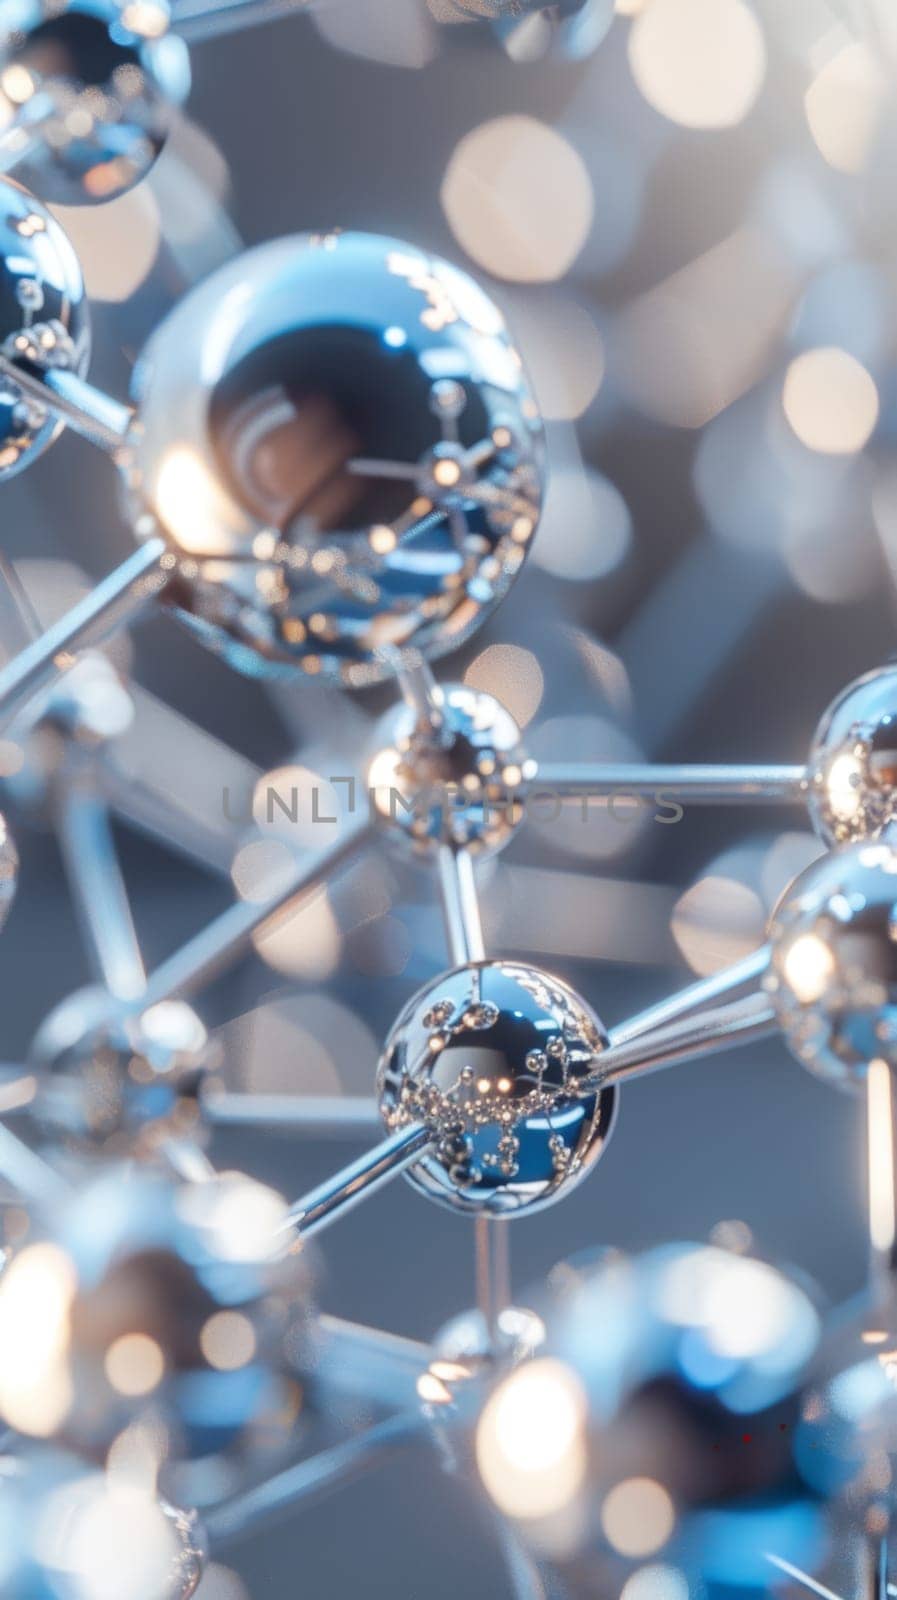 Softly illuminated crystalline molecular structures with reflective surfaces offer a visually striking image with a shallow depth of field